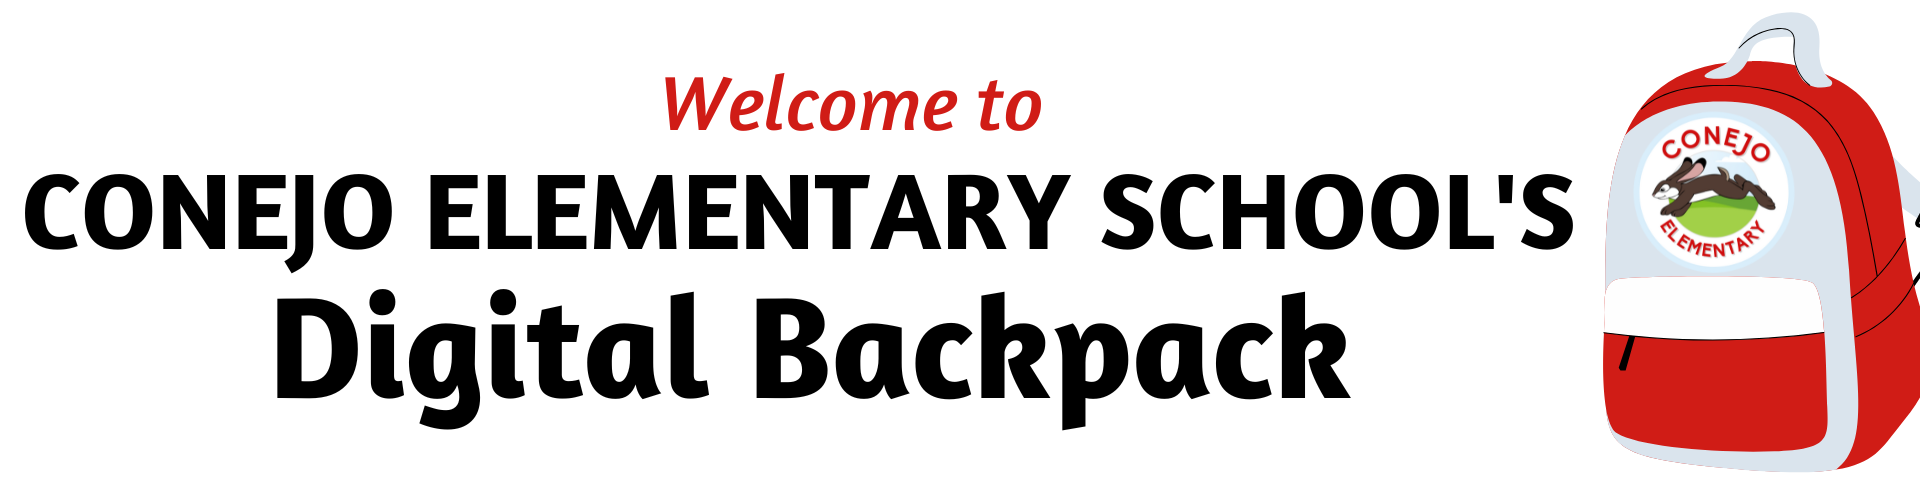 Welcome to Conejo Elementary's Digital Backpack